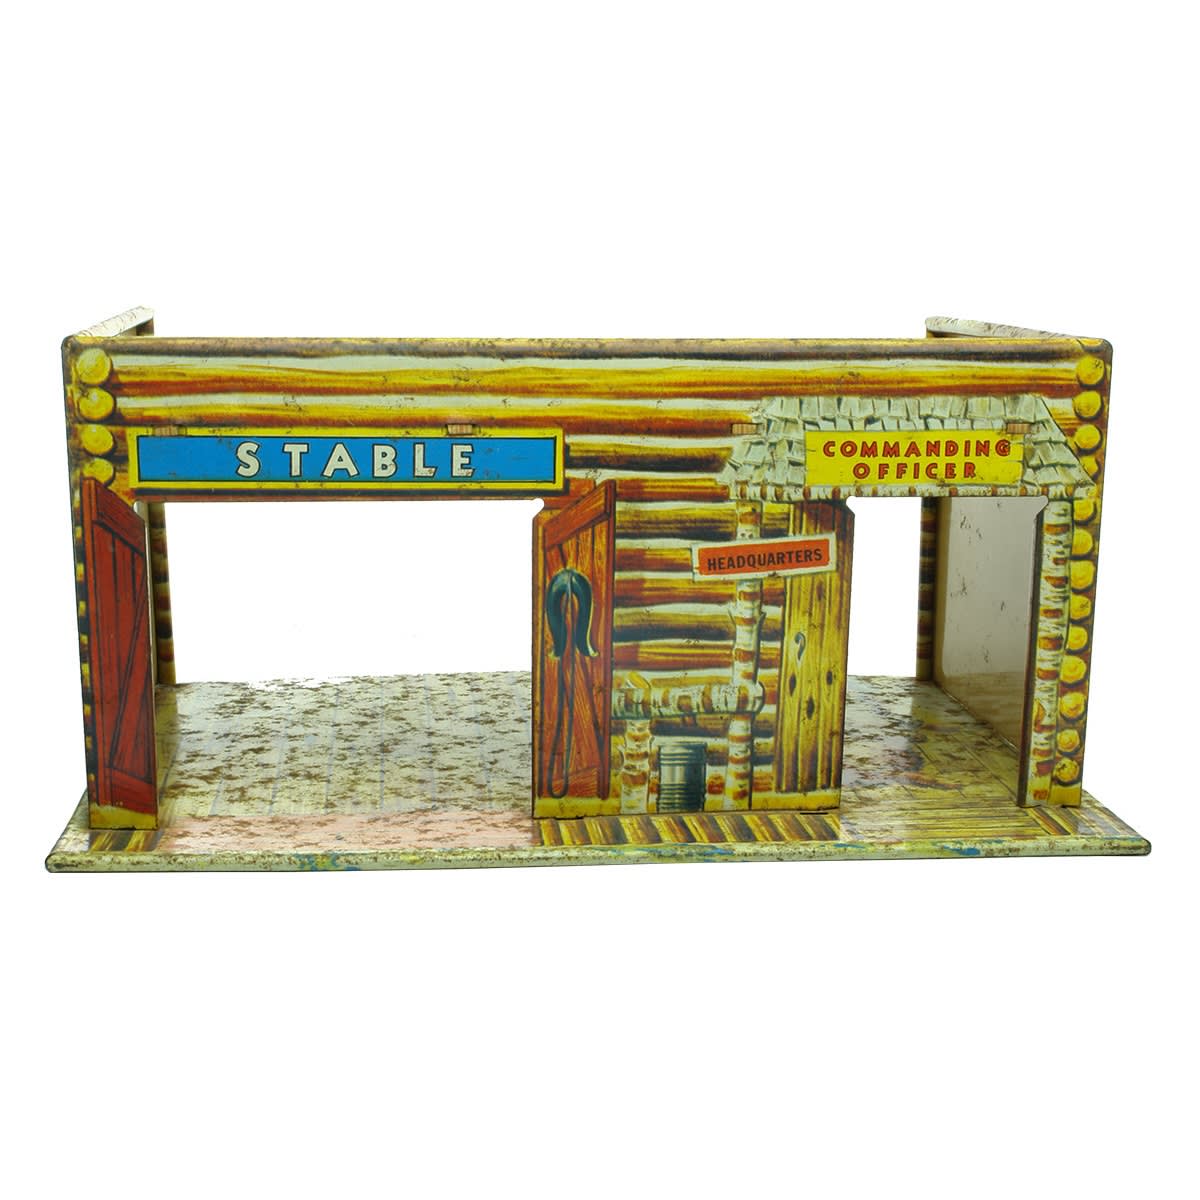 Tin Toy. Log Cabin style building for Cowboys & Indians. Stable and Commanding Officer.